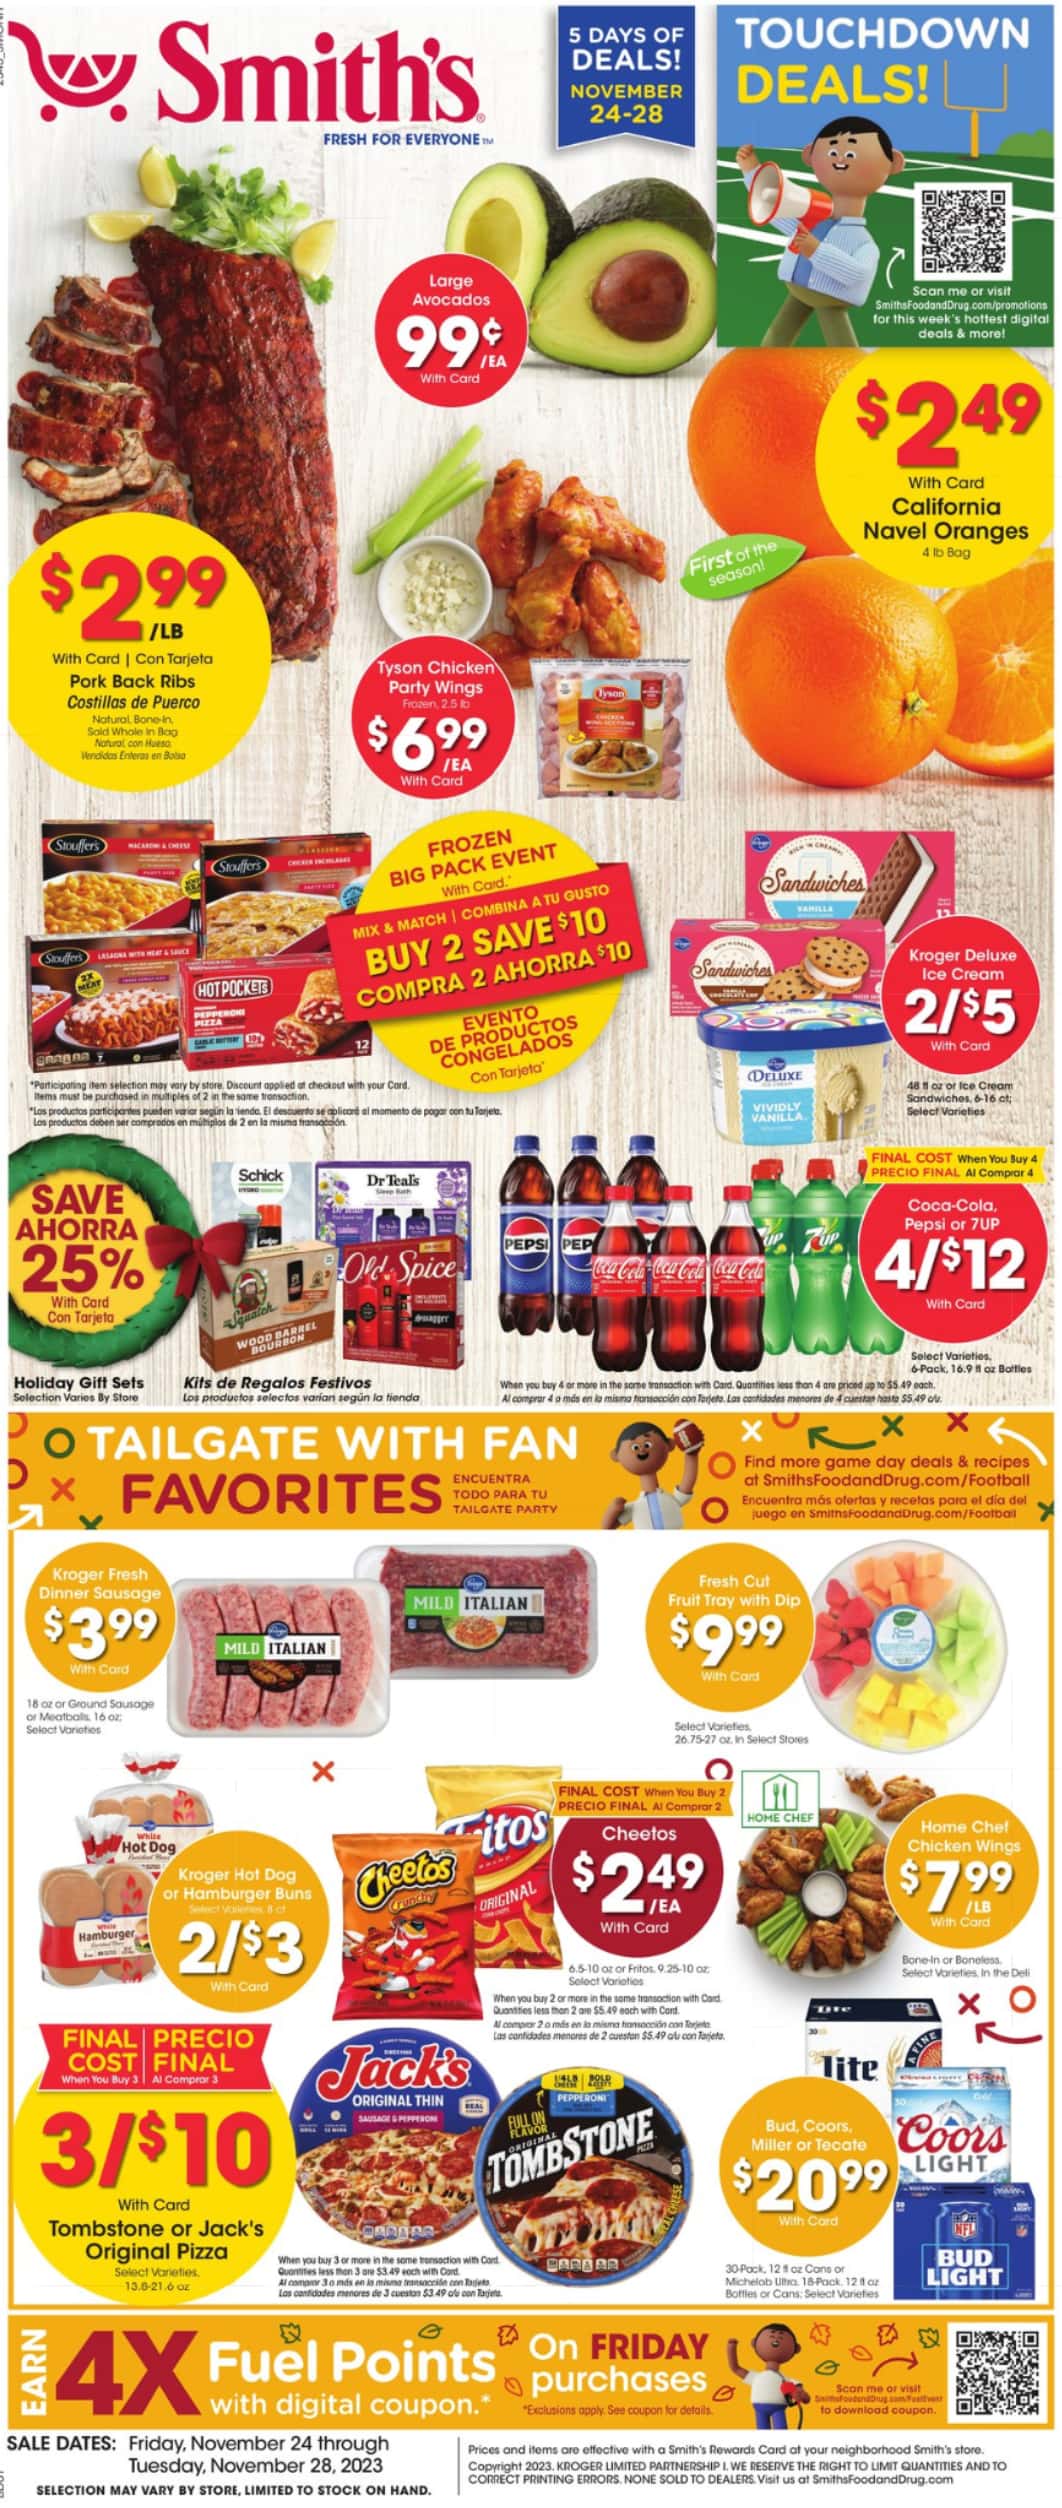 Smith's Black Friday July 2024 Weekly Sales, Deals, Discounts and Digital Coupons.